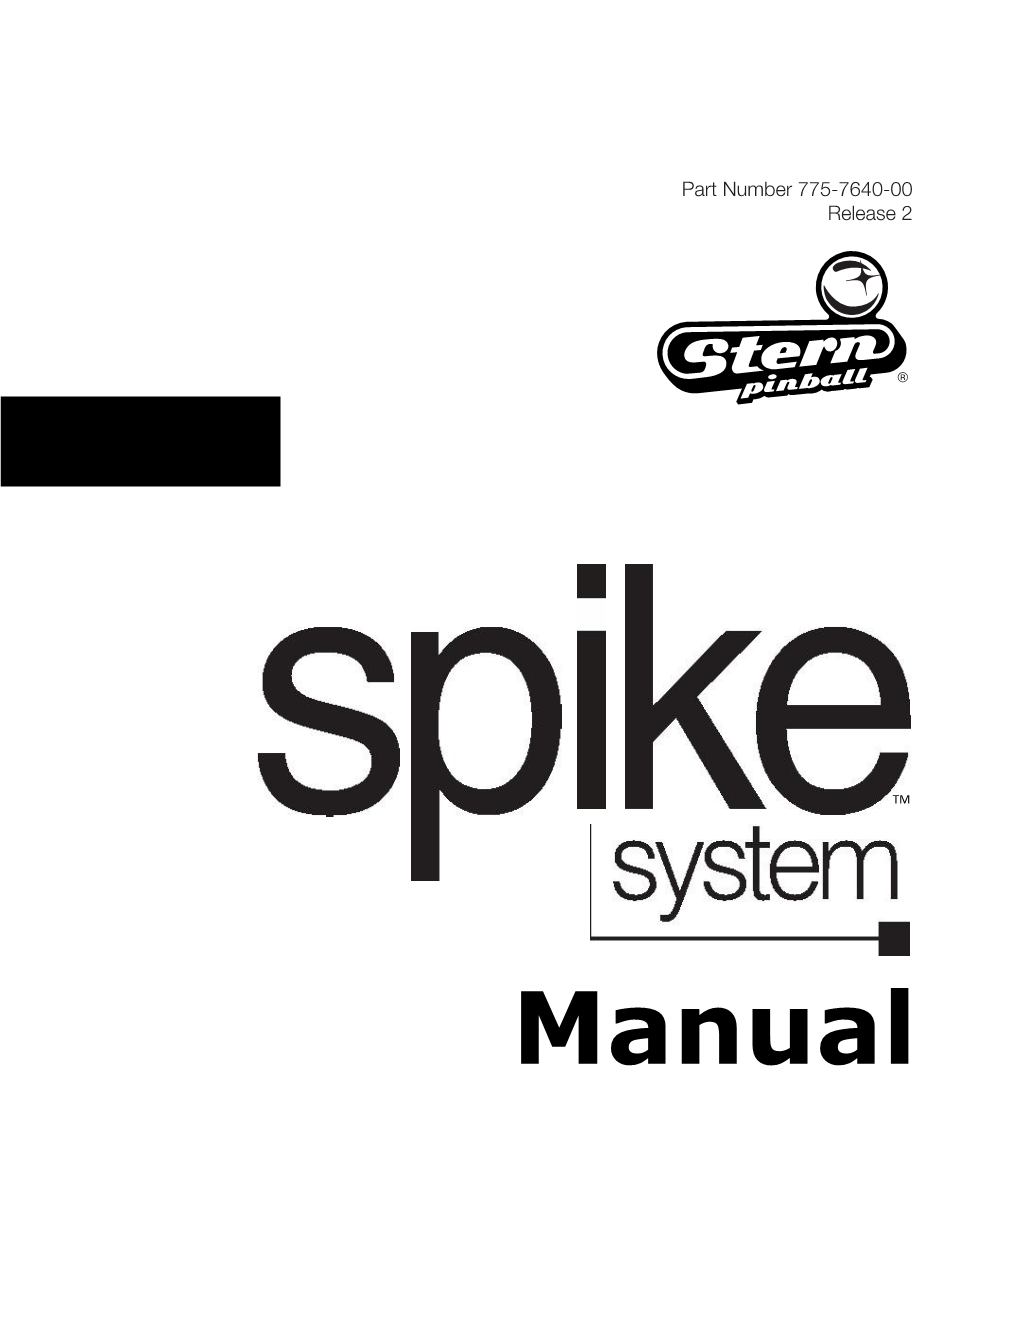 SPIKE System Manual